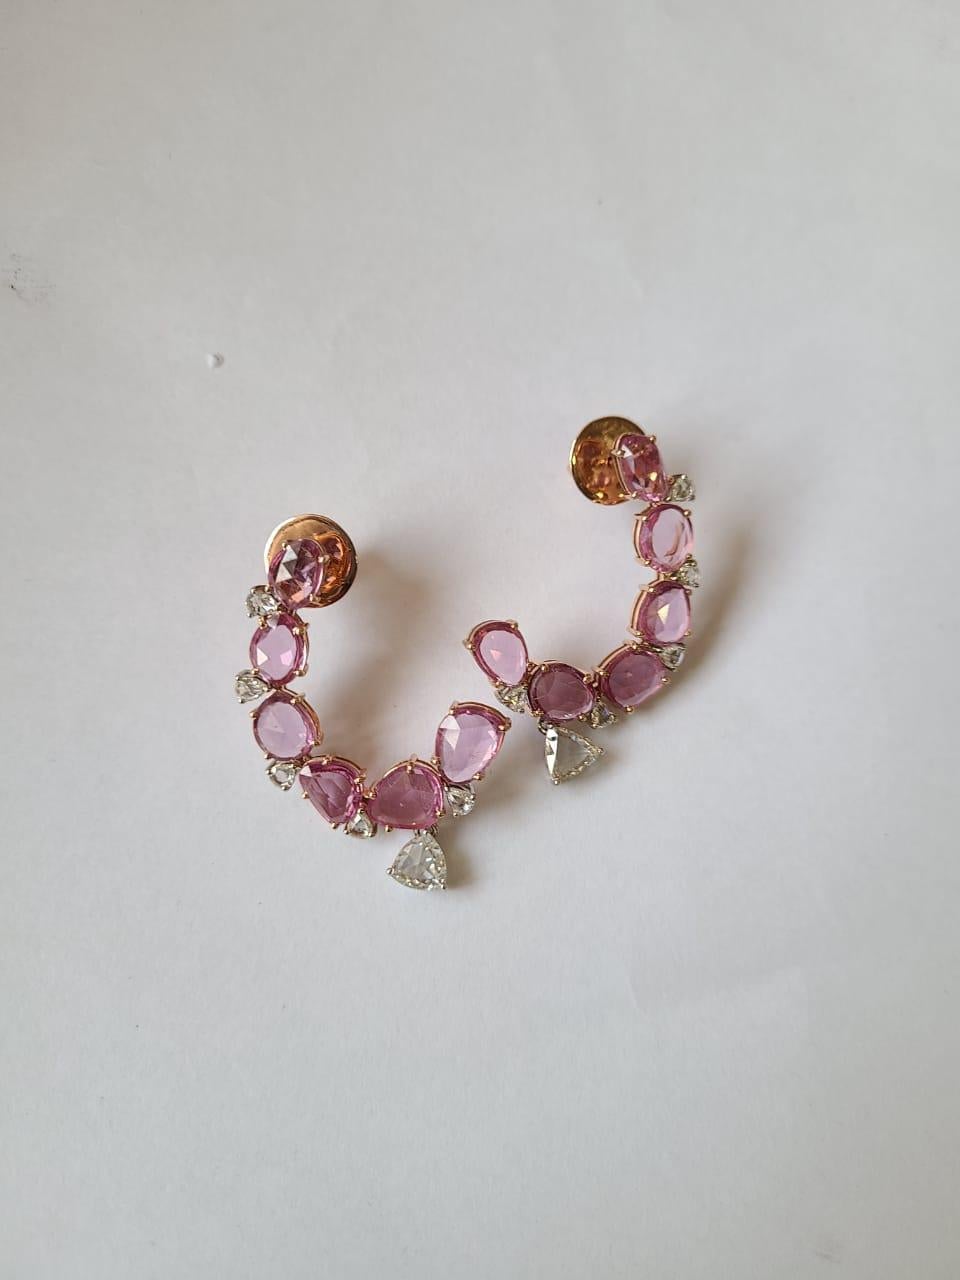 A very dainty and beautiful pair of Pink Sapphire Chandelier / Hoop Earrings set in 18K Rose Gold & Diamonds. The weight of the Pink Sapphires is 12.34 carats. The Pink Sapphires Rose Cuts are sourced from Madagascar. The weight of the Diamond Rose